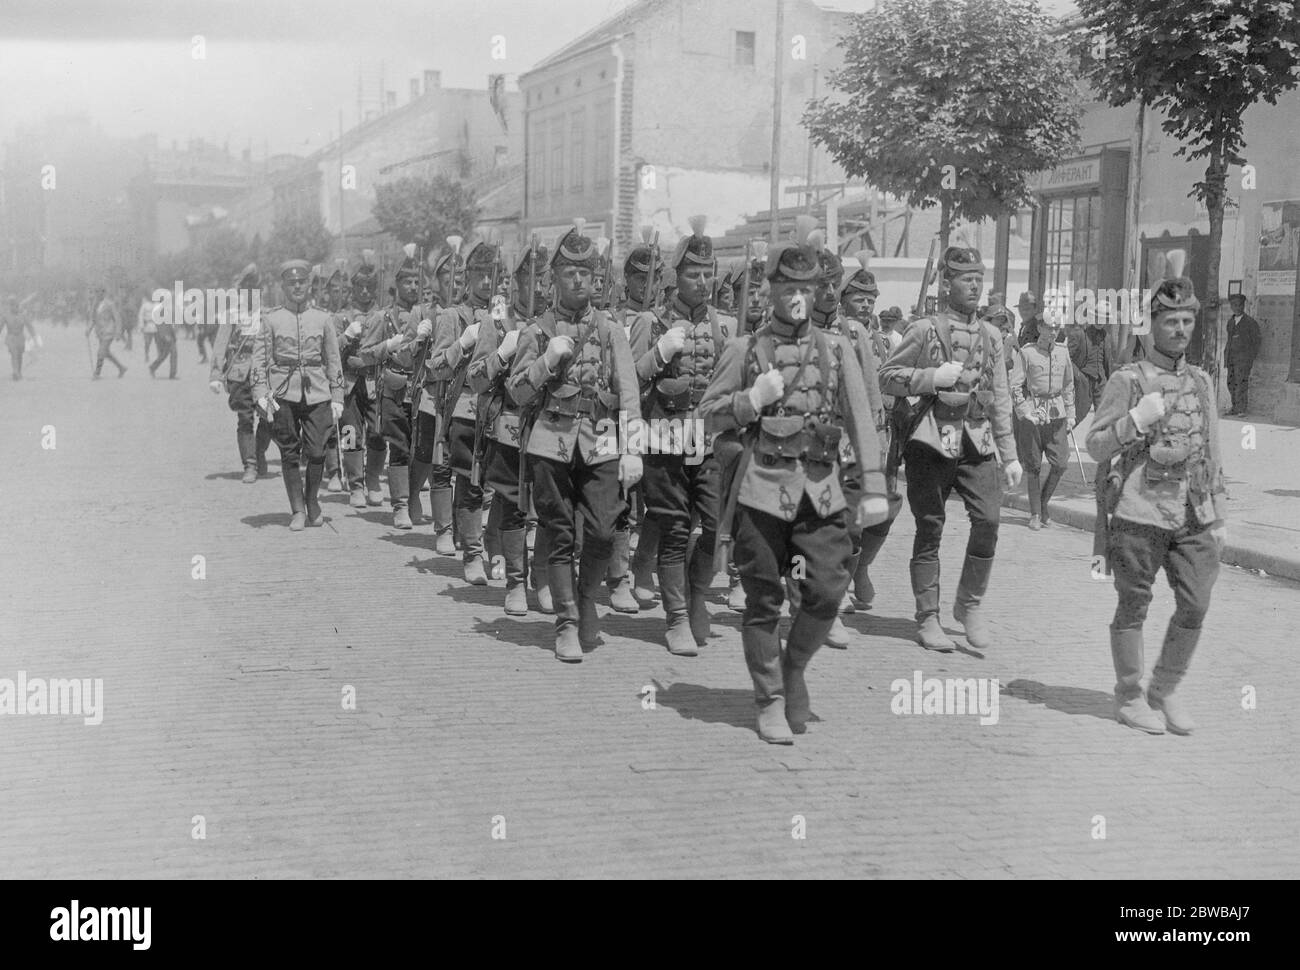 Preparing for the Royal Wedding at Belgrade . King Alexander of Serbia and Princess Marie of Romania are to be married at the cathedral in Belgrade on Thursday . The Royal Guard in their picturesque uniforms marching through the streets of Belgrade . 7 June 1922 Stock Photo